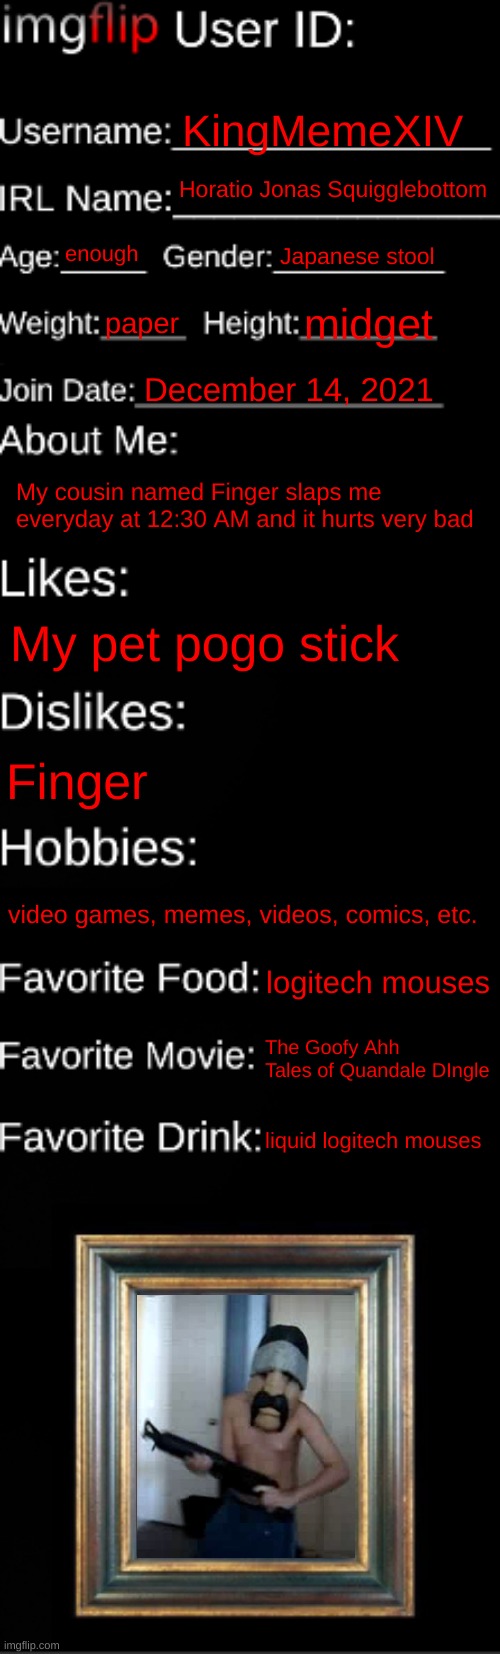 imgflip id (satire) | KingMemeXIV; Horatio Jonas Squigglebottom; enough; Japanese stool; paper; midget; December 14, 2021; My cousin named Finger slaps me everyday at 12:30 AM and it hurts very bad; My pet pogo stick; Finger; video games, memes, videos, comics, etc. logitech mouses; The Goofy Ahh Tales of Quandale DIngle; liquid logitech mouses | image tagged in imgflip id card | made w/ Imgflip meme maker